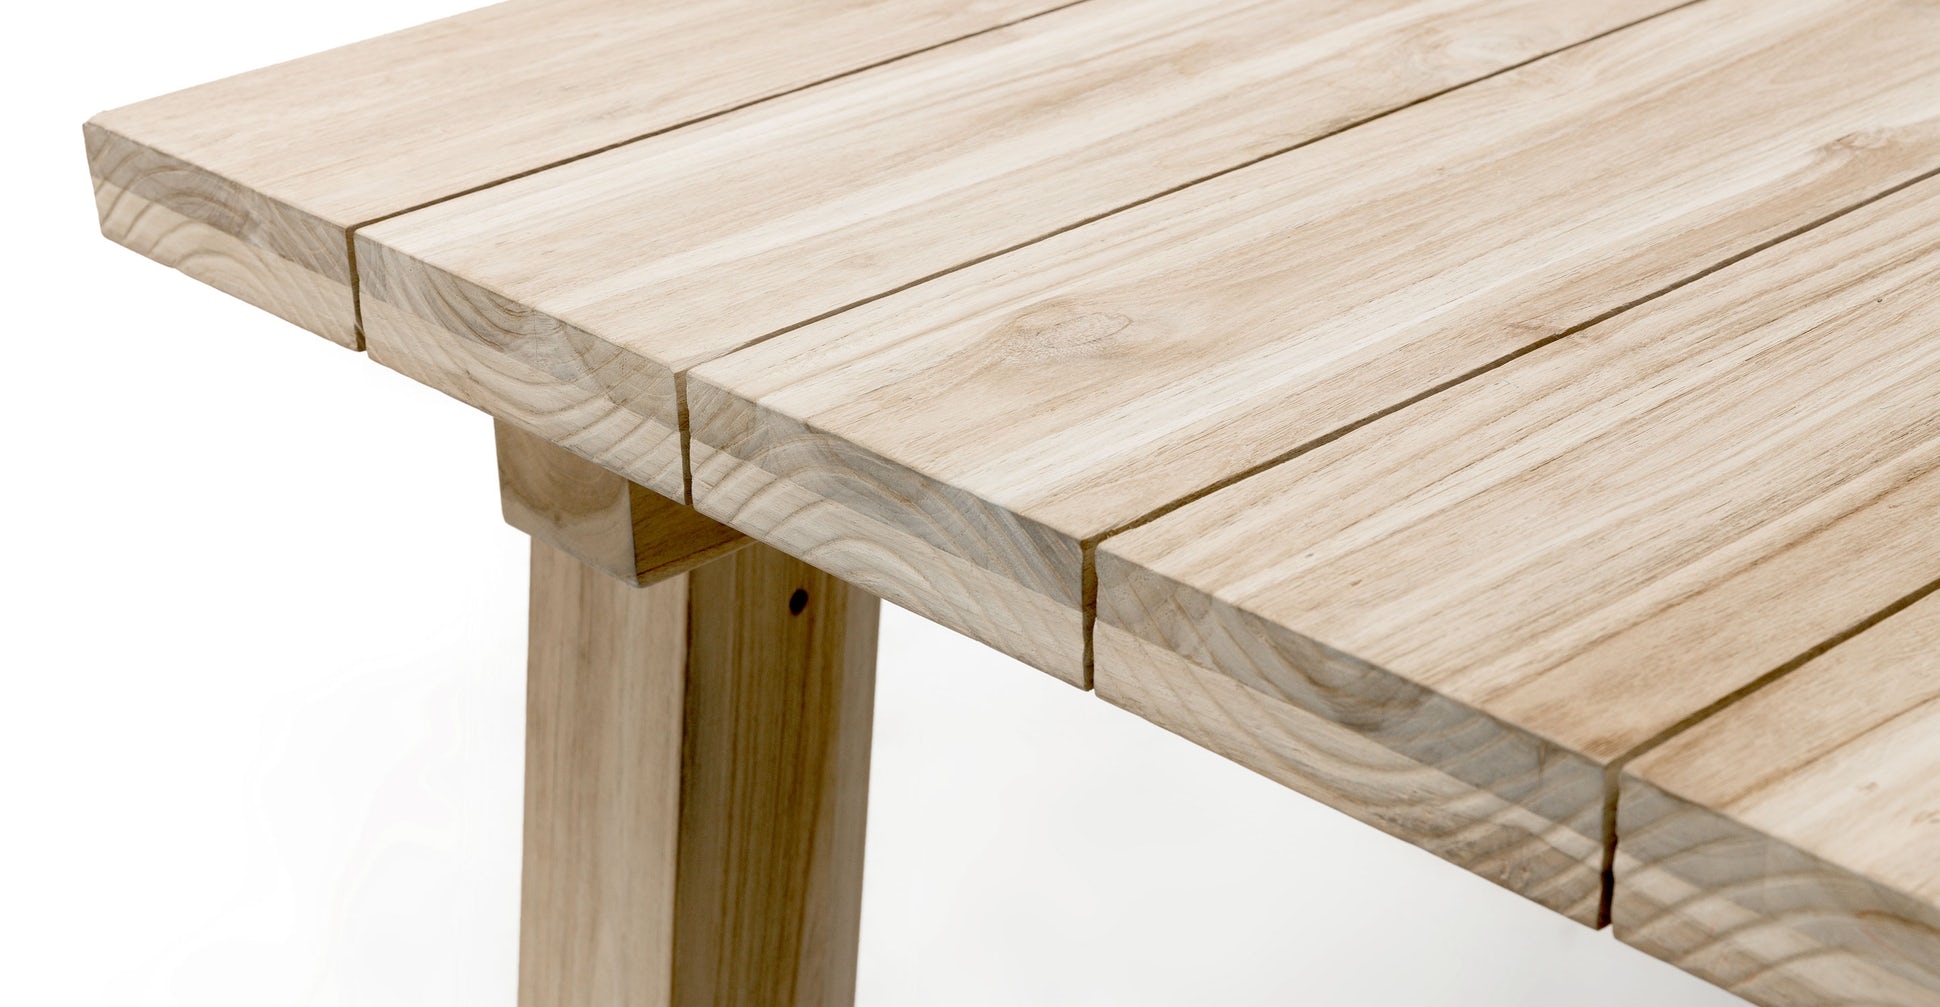 Teaka Dining Table For 8 - Image 3